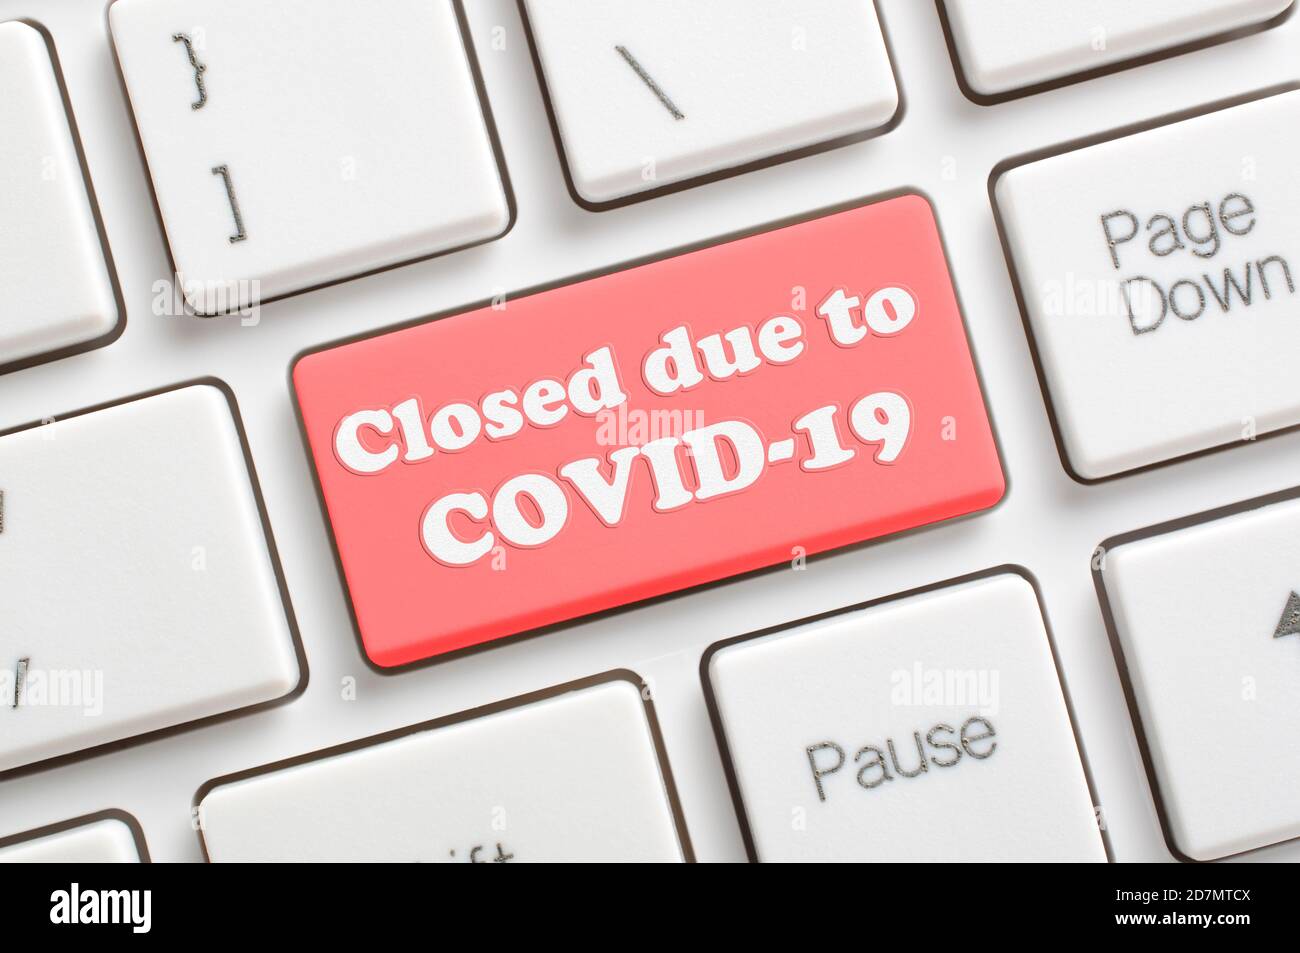 Closed due to COVID-19 key on keyboard Stock Photo